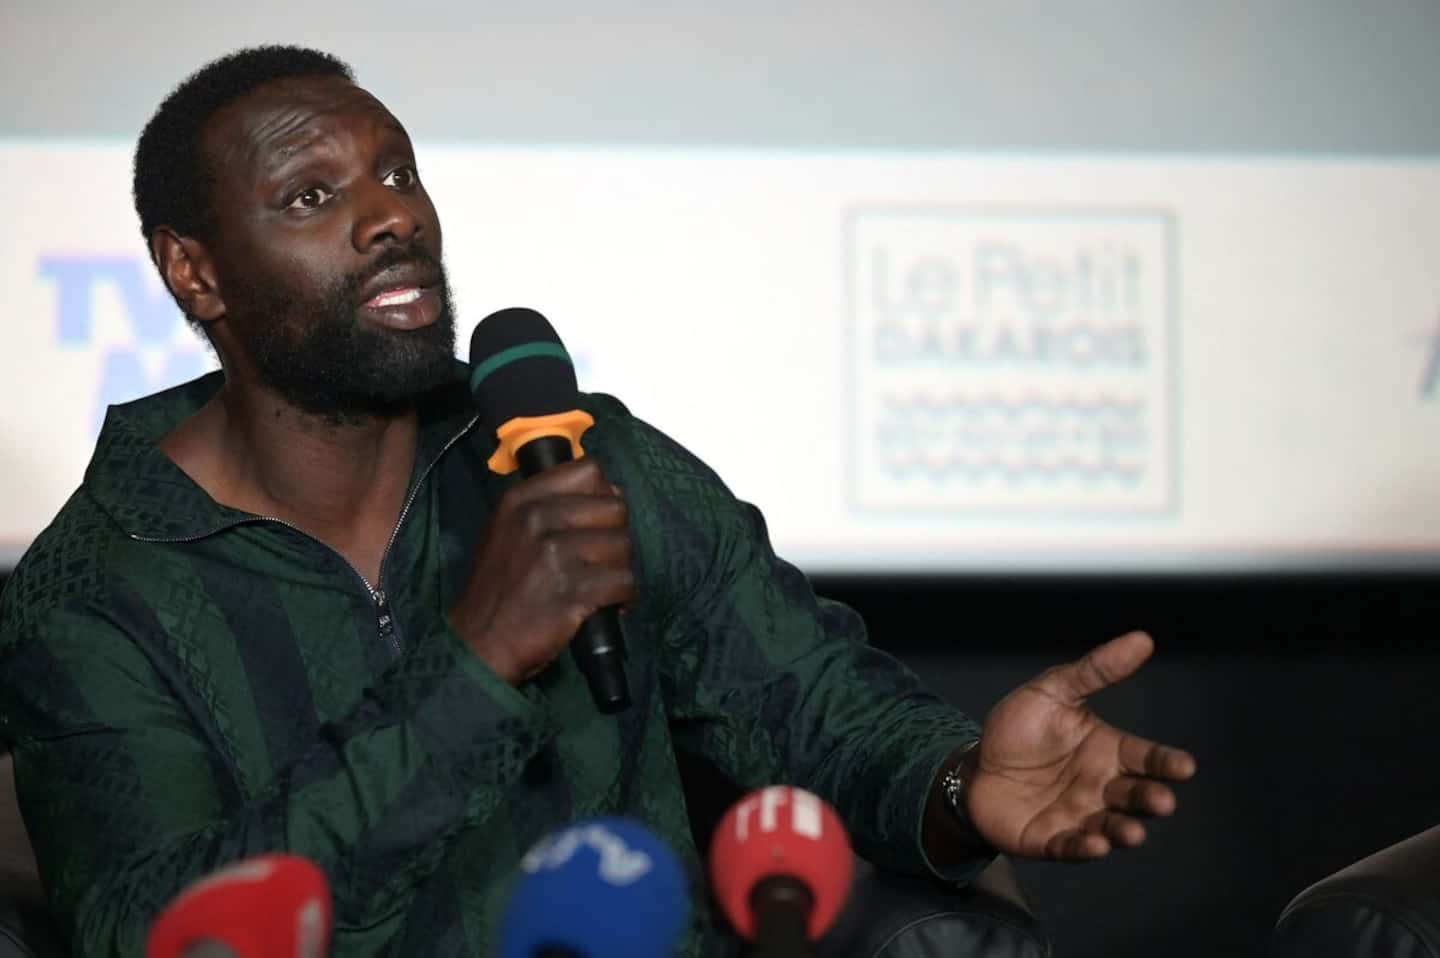 Omar Sy responds to the controversy over his comments regarding the war in Ukraine